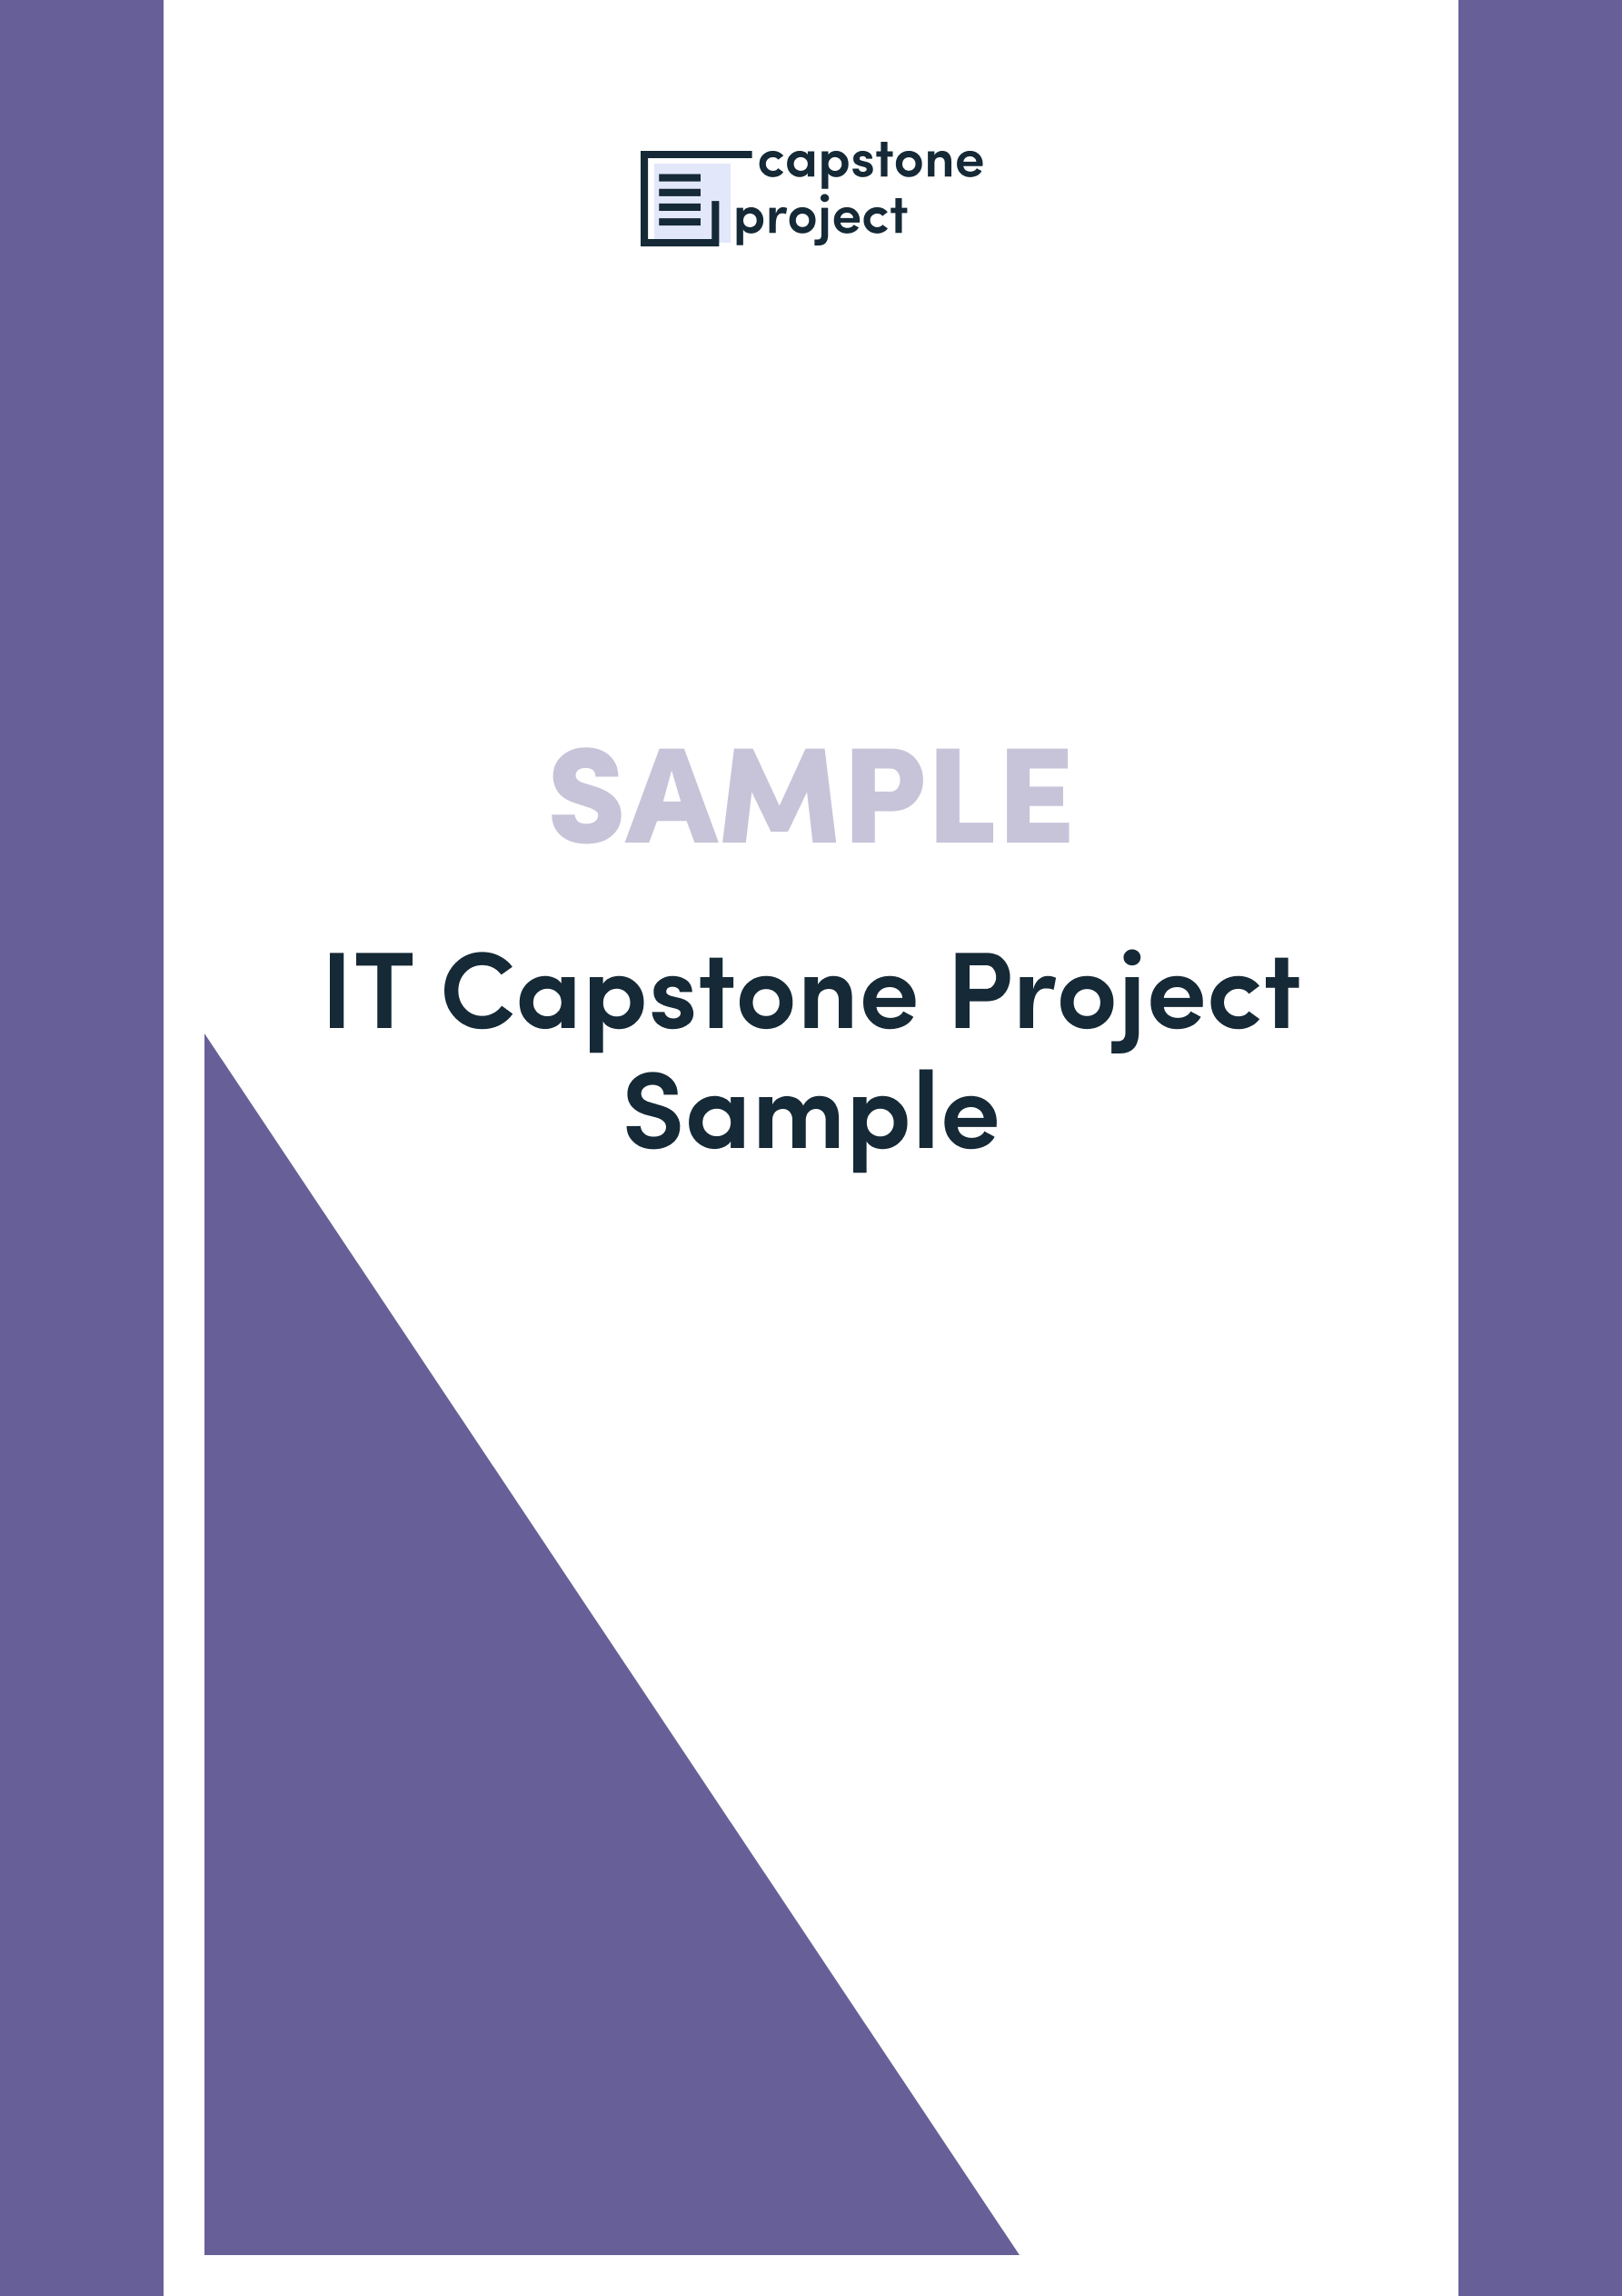 capstone project title proposal for information technology